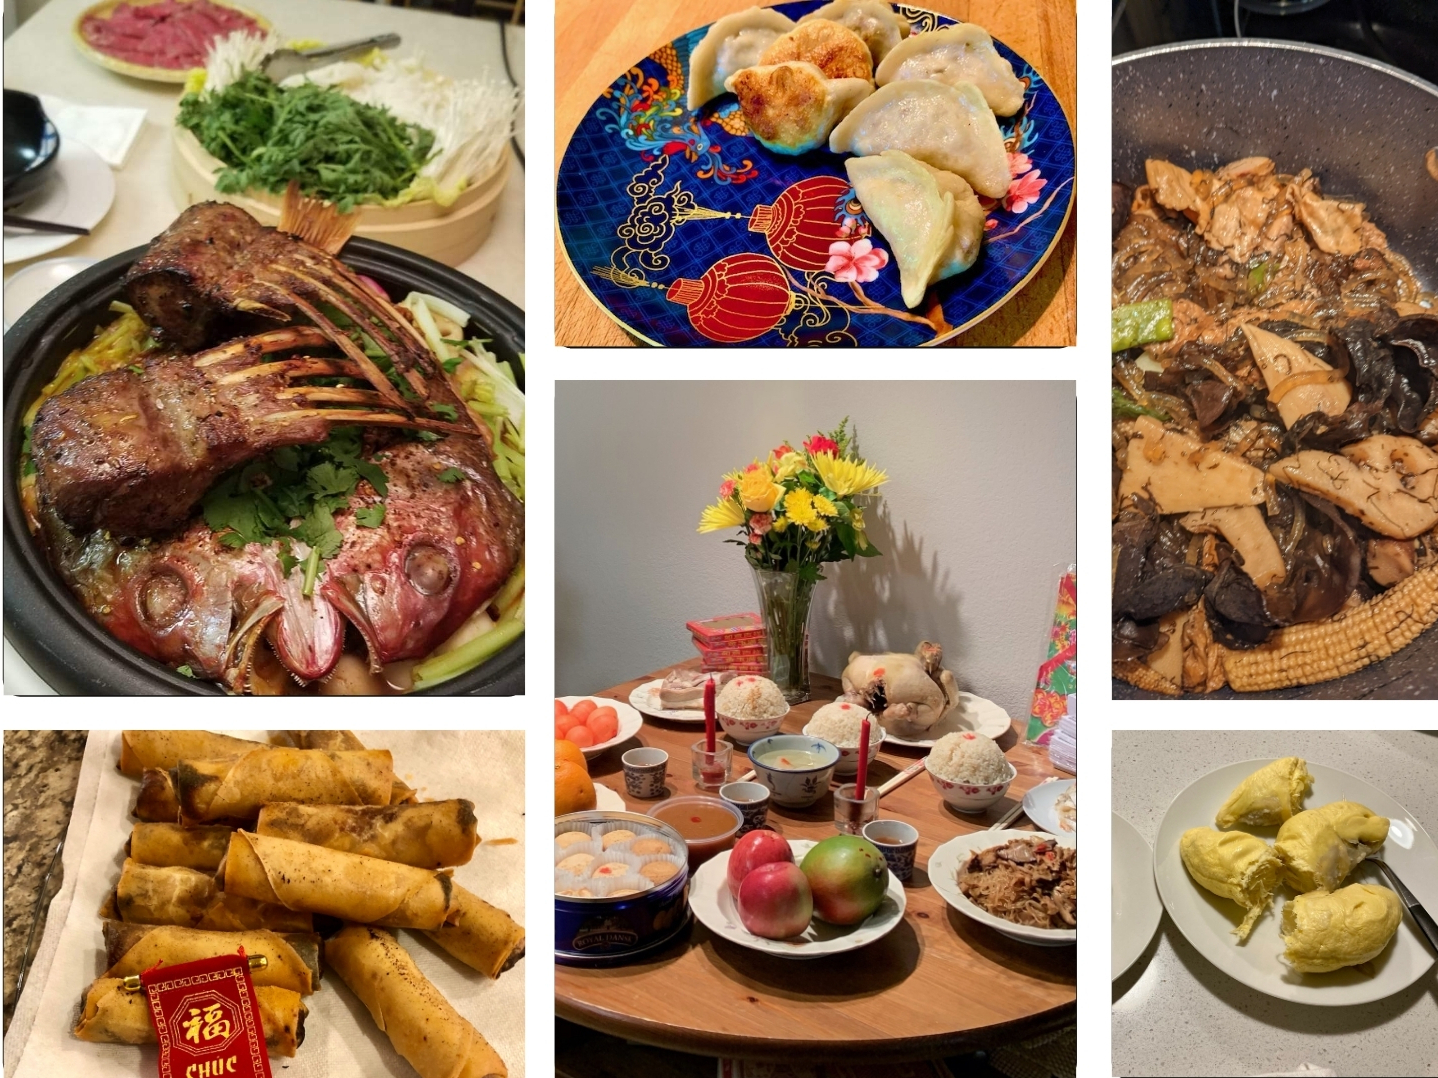 Food holds special meaning on the Lunar New Year. Readers share their favorite dishes